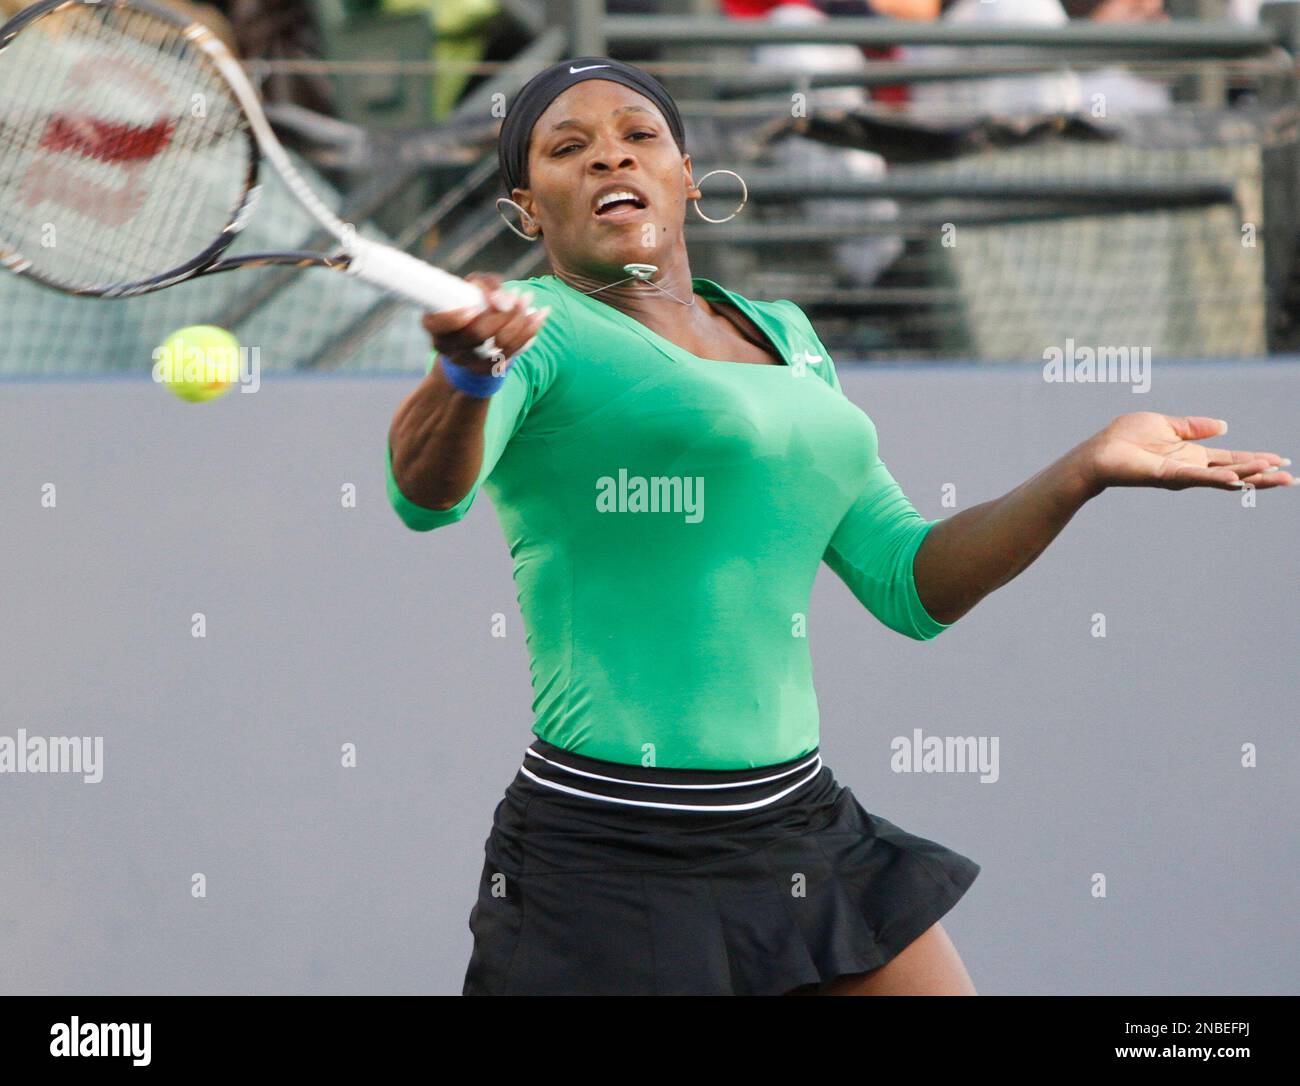 Serena Williams hits a forehand against Sabine Lisicki, of Germany, during  the Bank of the West tennis tournament, Saturday, July 30, 2011, in  Stanford, Calif. Williams beat Lisicki in the semifinal match